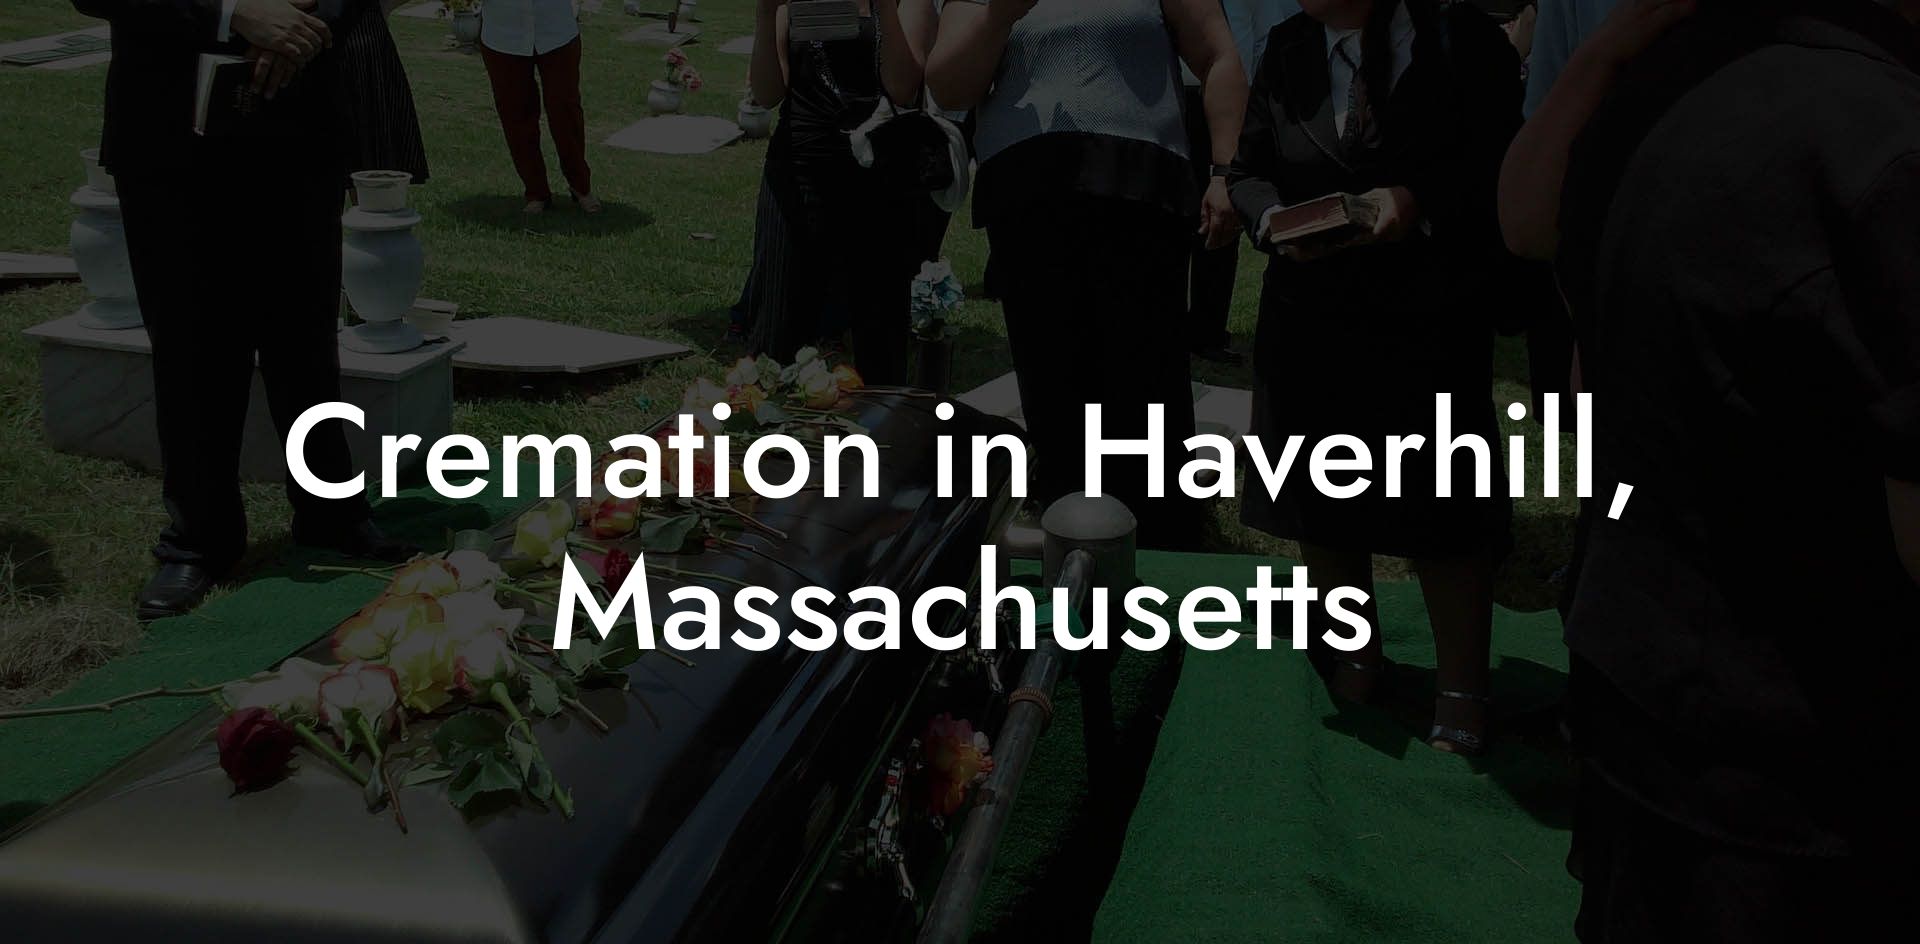 Cremation in Haverhill, Massachusetts - Eulogy Assistant